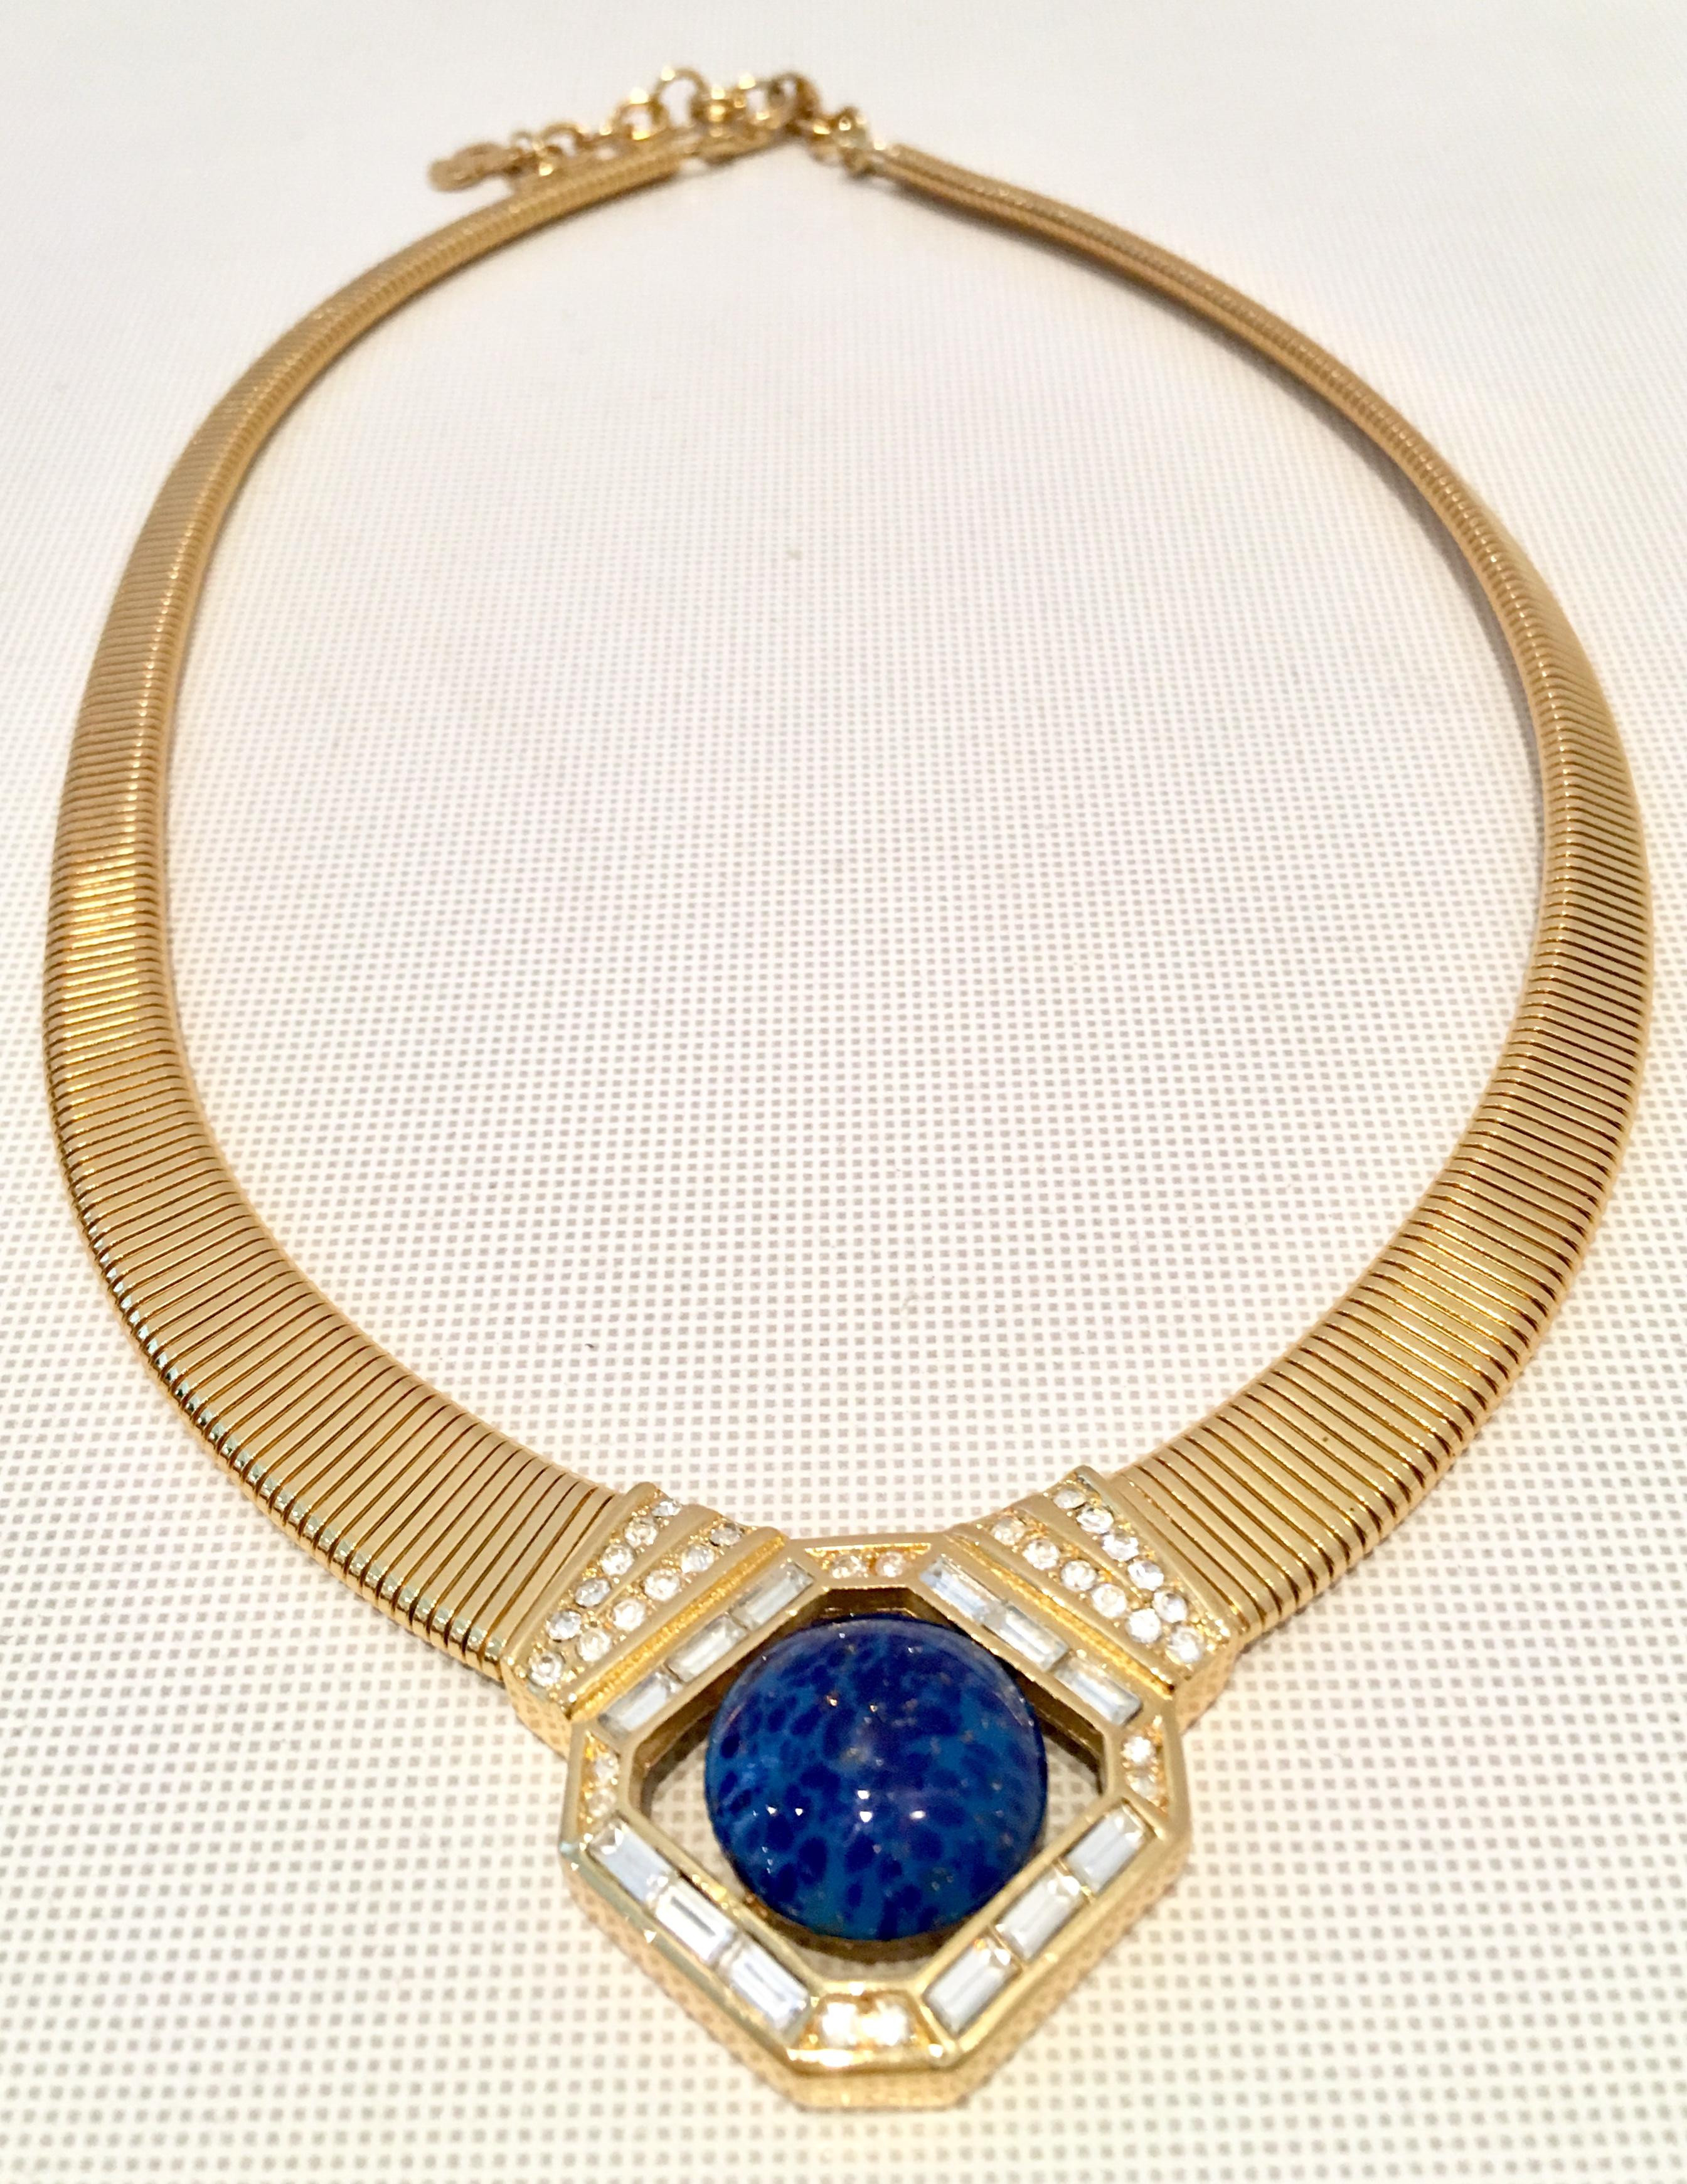 20th Century Gold Plate Choker Style Necklace By, Christian Dior. Features a gold plate textured necklace with a large central faux cerulean blue lapis lazuli round inch stone surrounded by Swarovski crystal clear paste set rhinestones. The fold